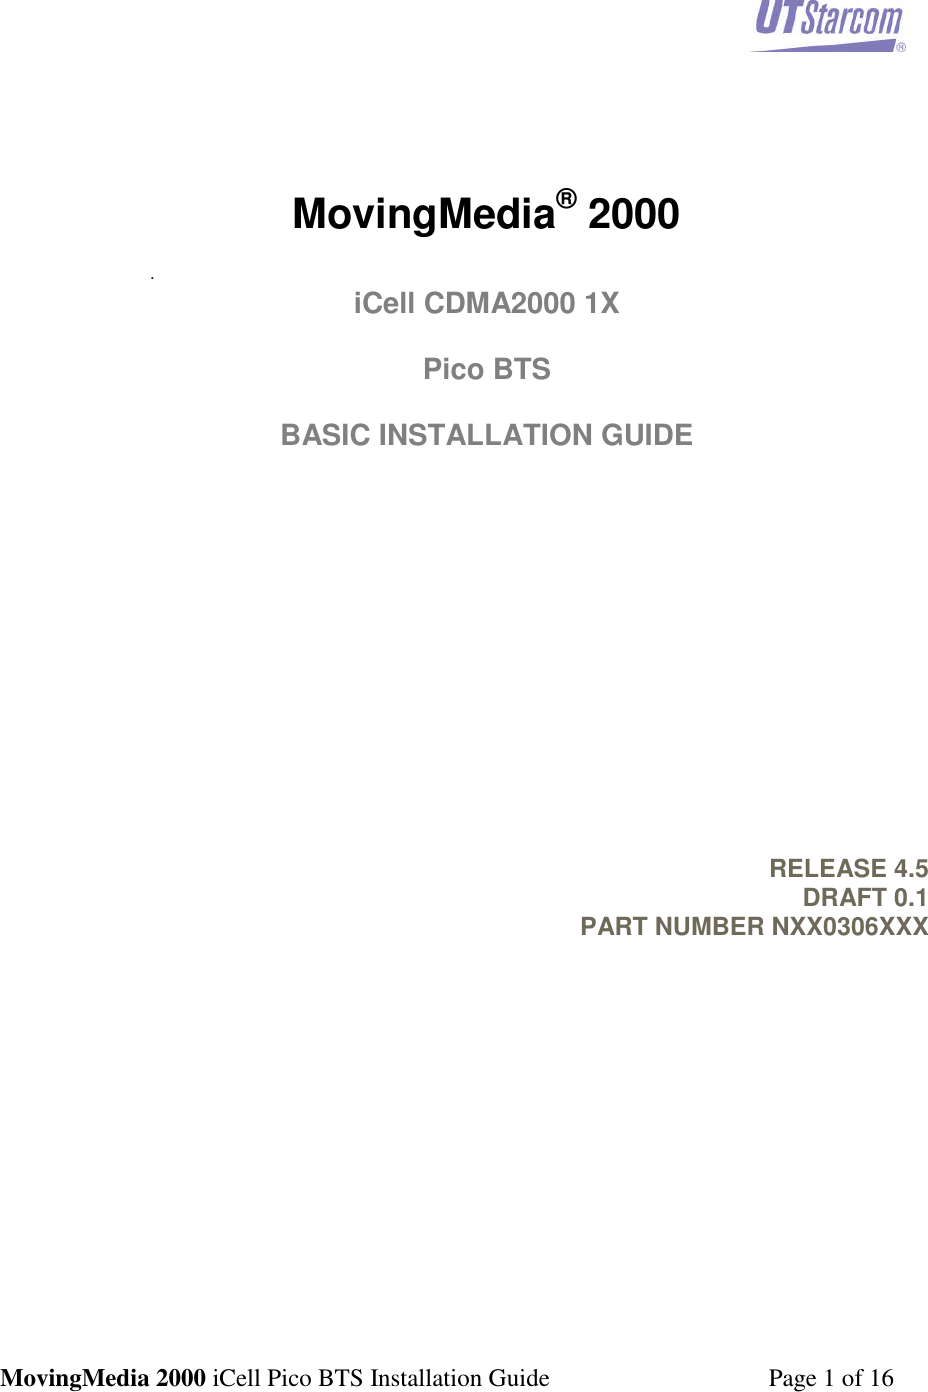 MovingMedia 2000 iCell Pico BTS Installation Guide Page 1 of 16MovingMedia®2000.iCell CDMA2000 1XPico BTSBASIC INSTALLATION GUIDERELEASE 4.5DRAFT 0.1PART NUMBER NXX0306XXX